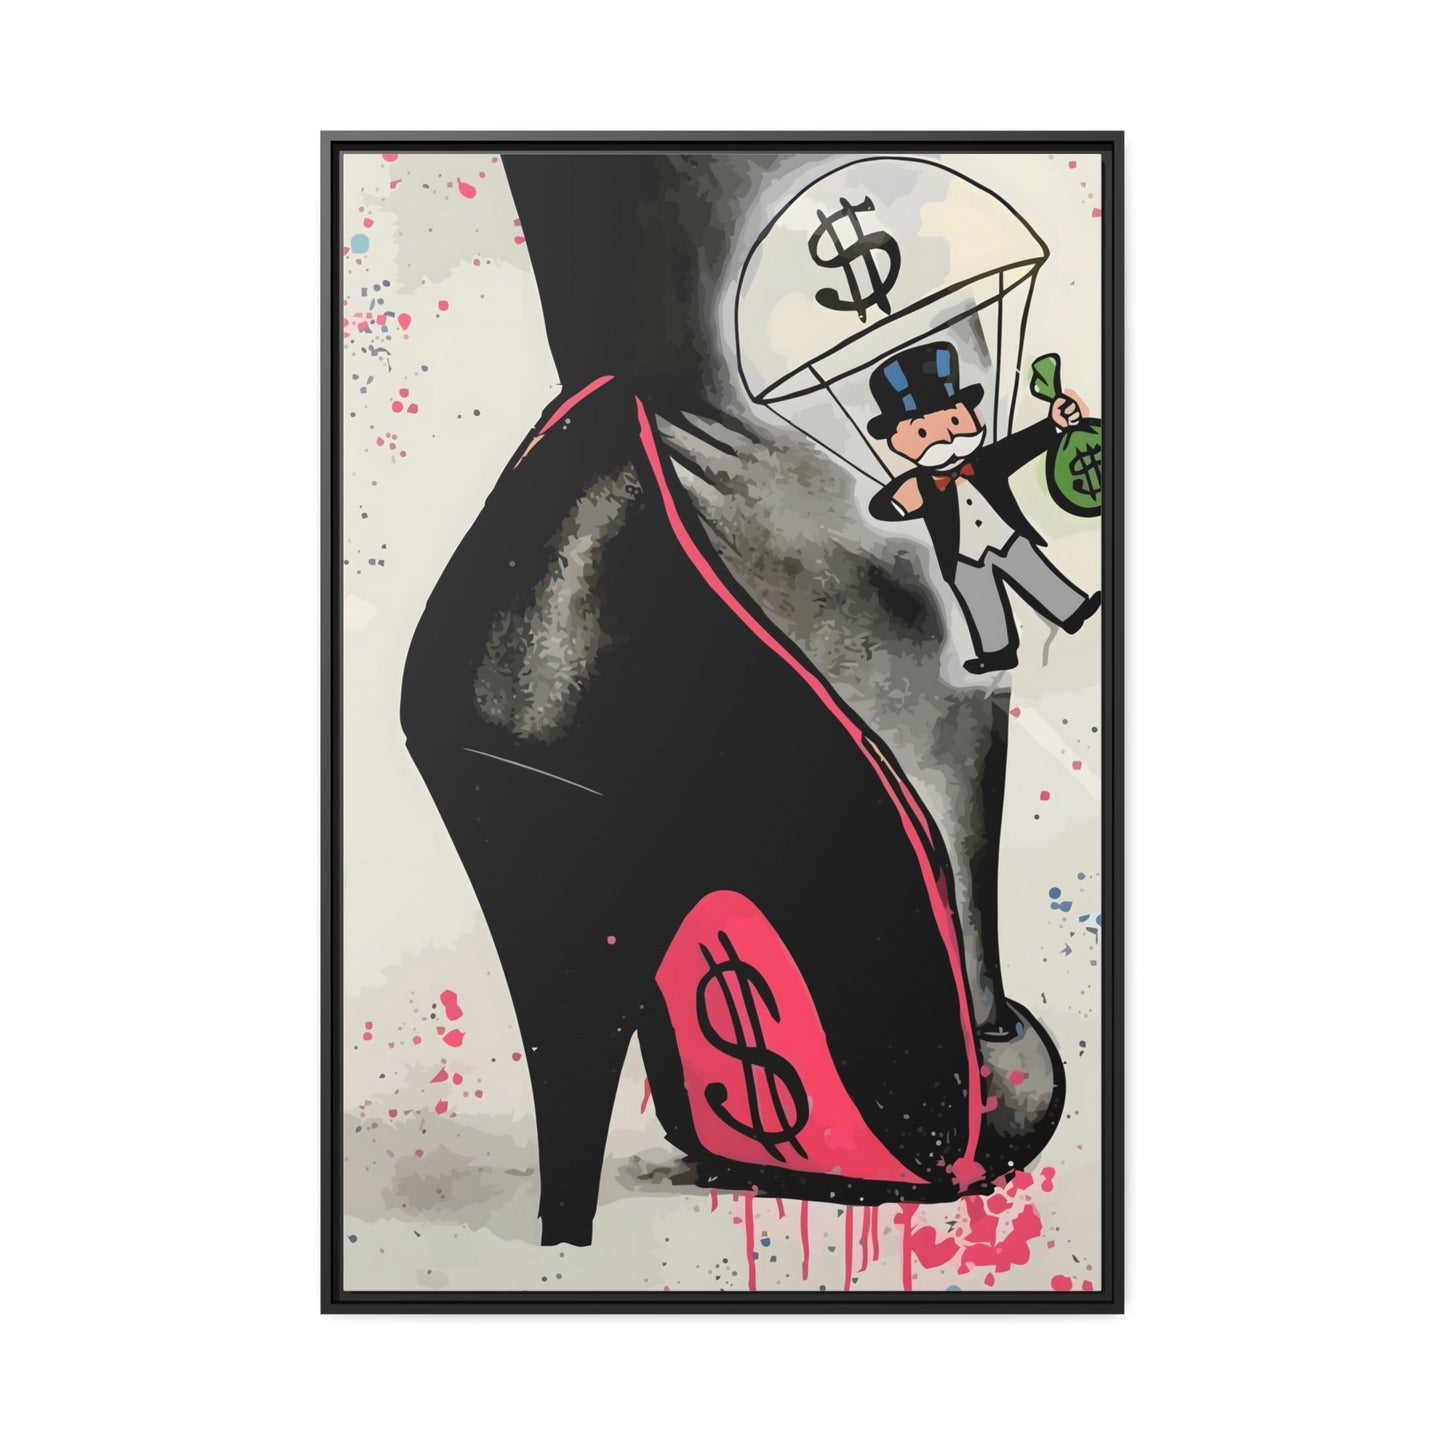 Graffiti with a Twist: Creative Framed Posters and Prints of Alec Monopoly's Graffiti Art on Framed Canvas